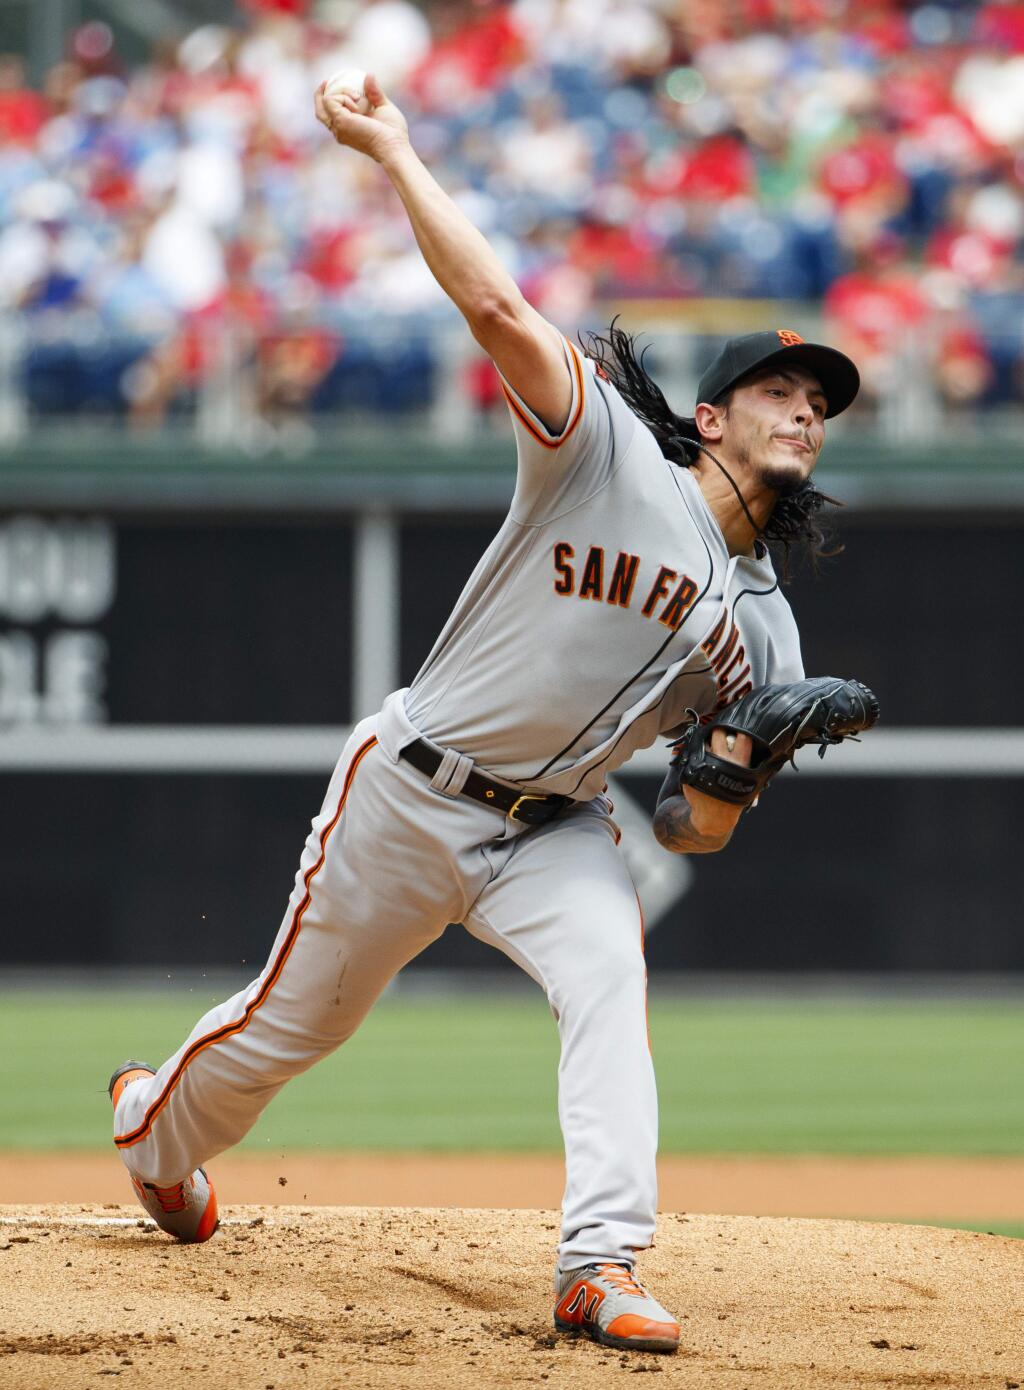 San Francisco Giants starting pitcher Dereck Rodriguez throws a pitch during the first inning of a baseball game against the Philadelphia Phillies, Thursday, Aug. 1, 2019, in Philadelphia. (AP Photo/Chris Szagola)